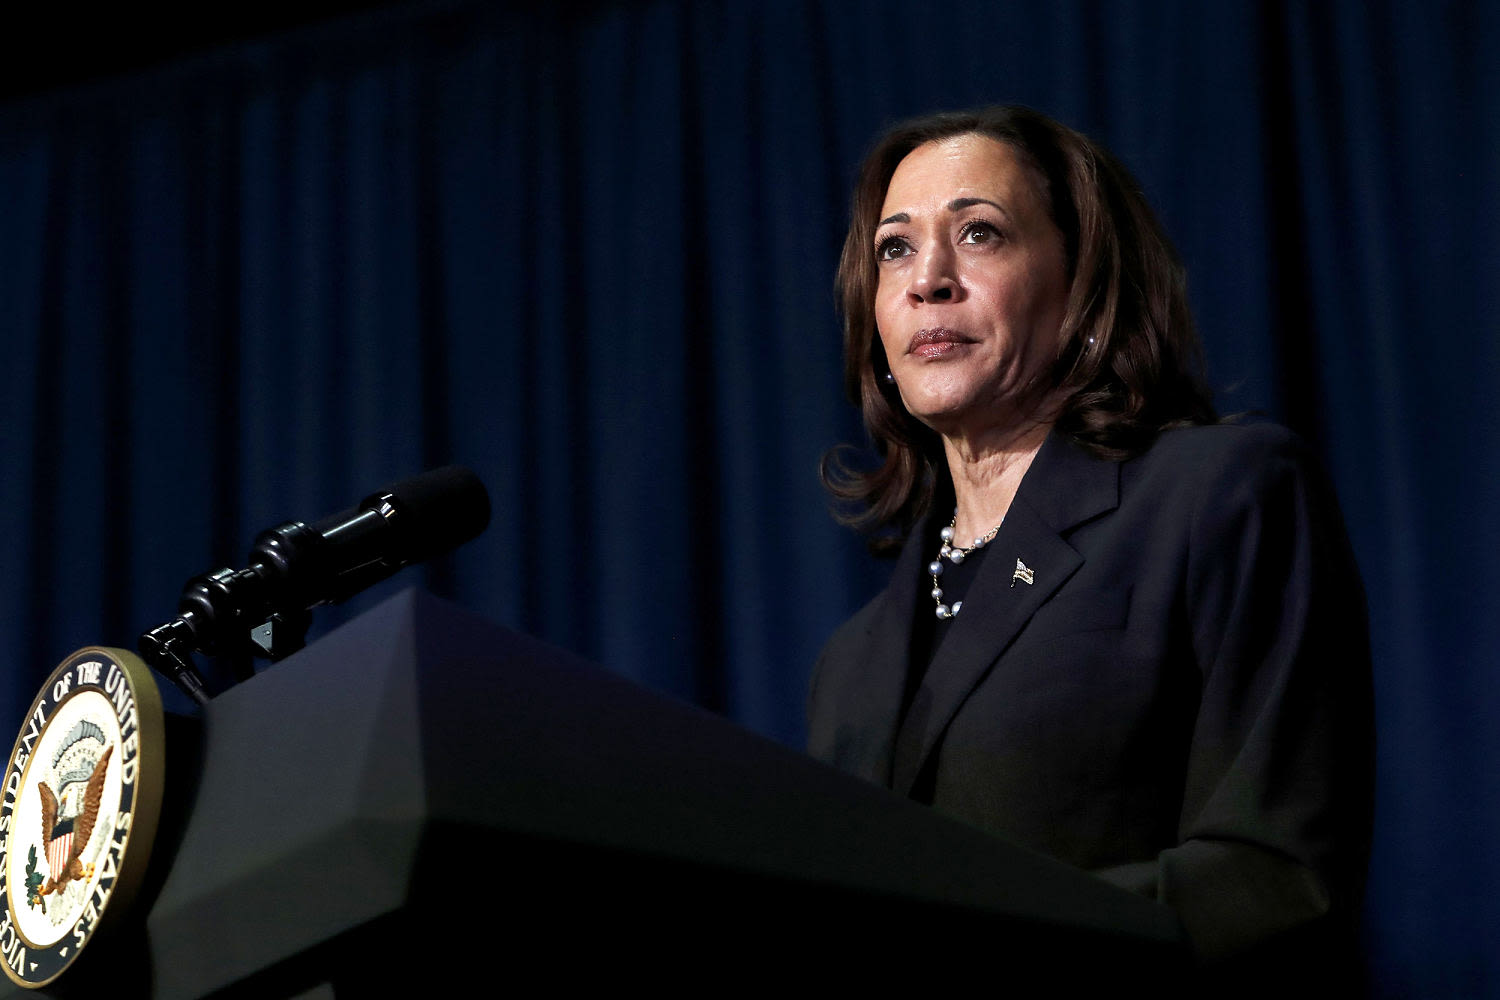 Harris' running mate search nears the finish line: From the Politics Desk